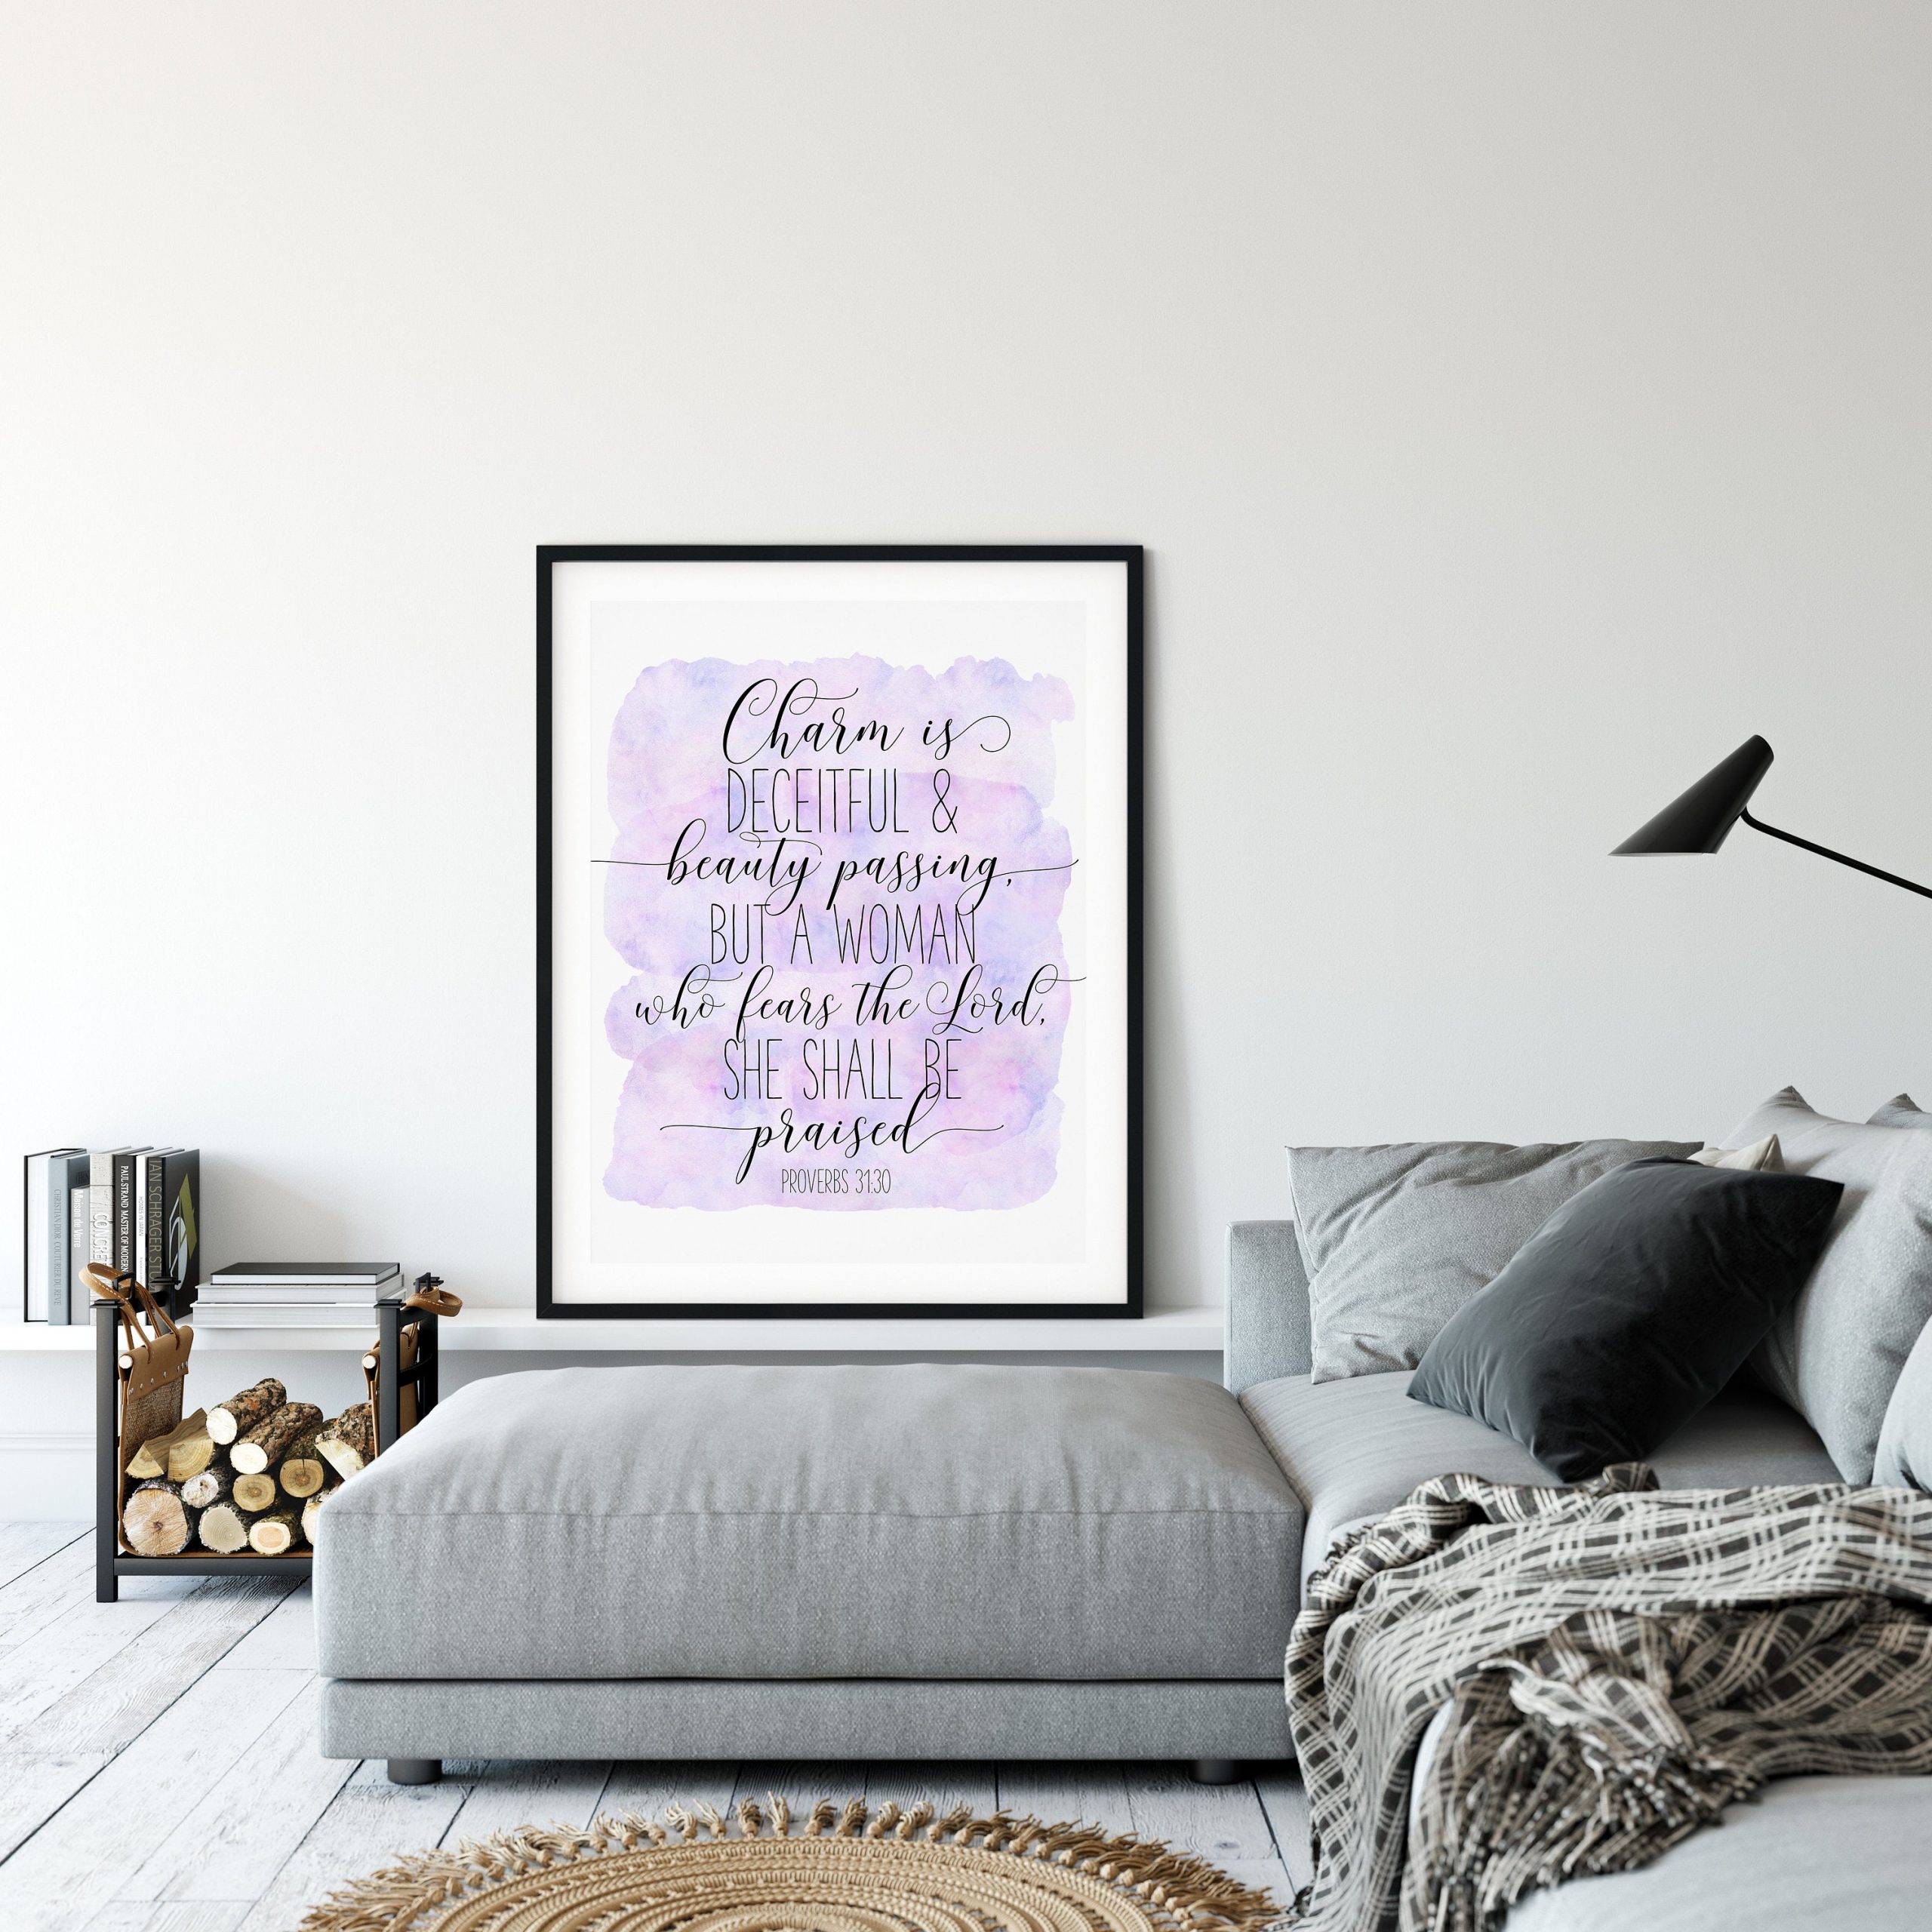 Proverbs 31:30, Charm is Deceitful Beauty Passing, Bible Verse Print Wall Art, Nursery Bible Quotes